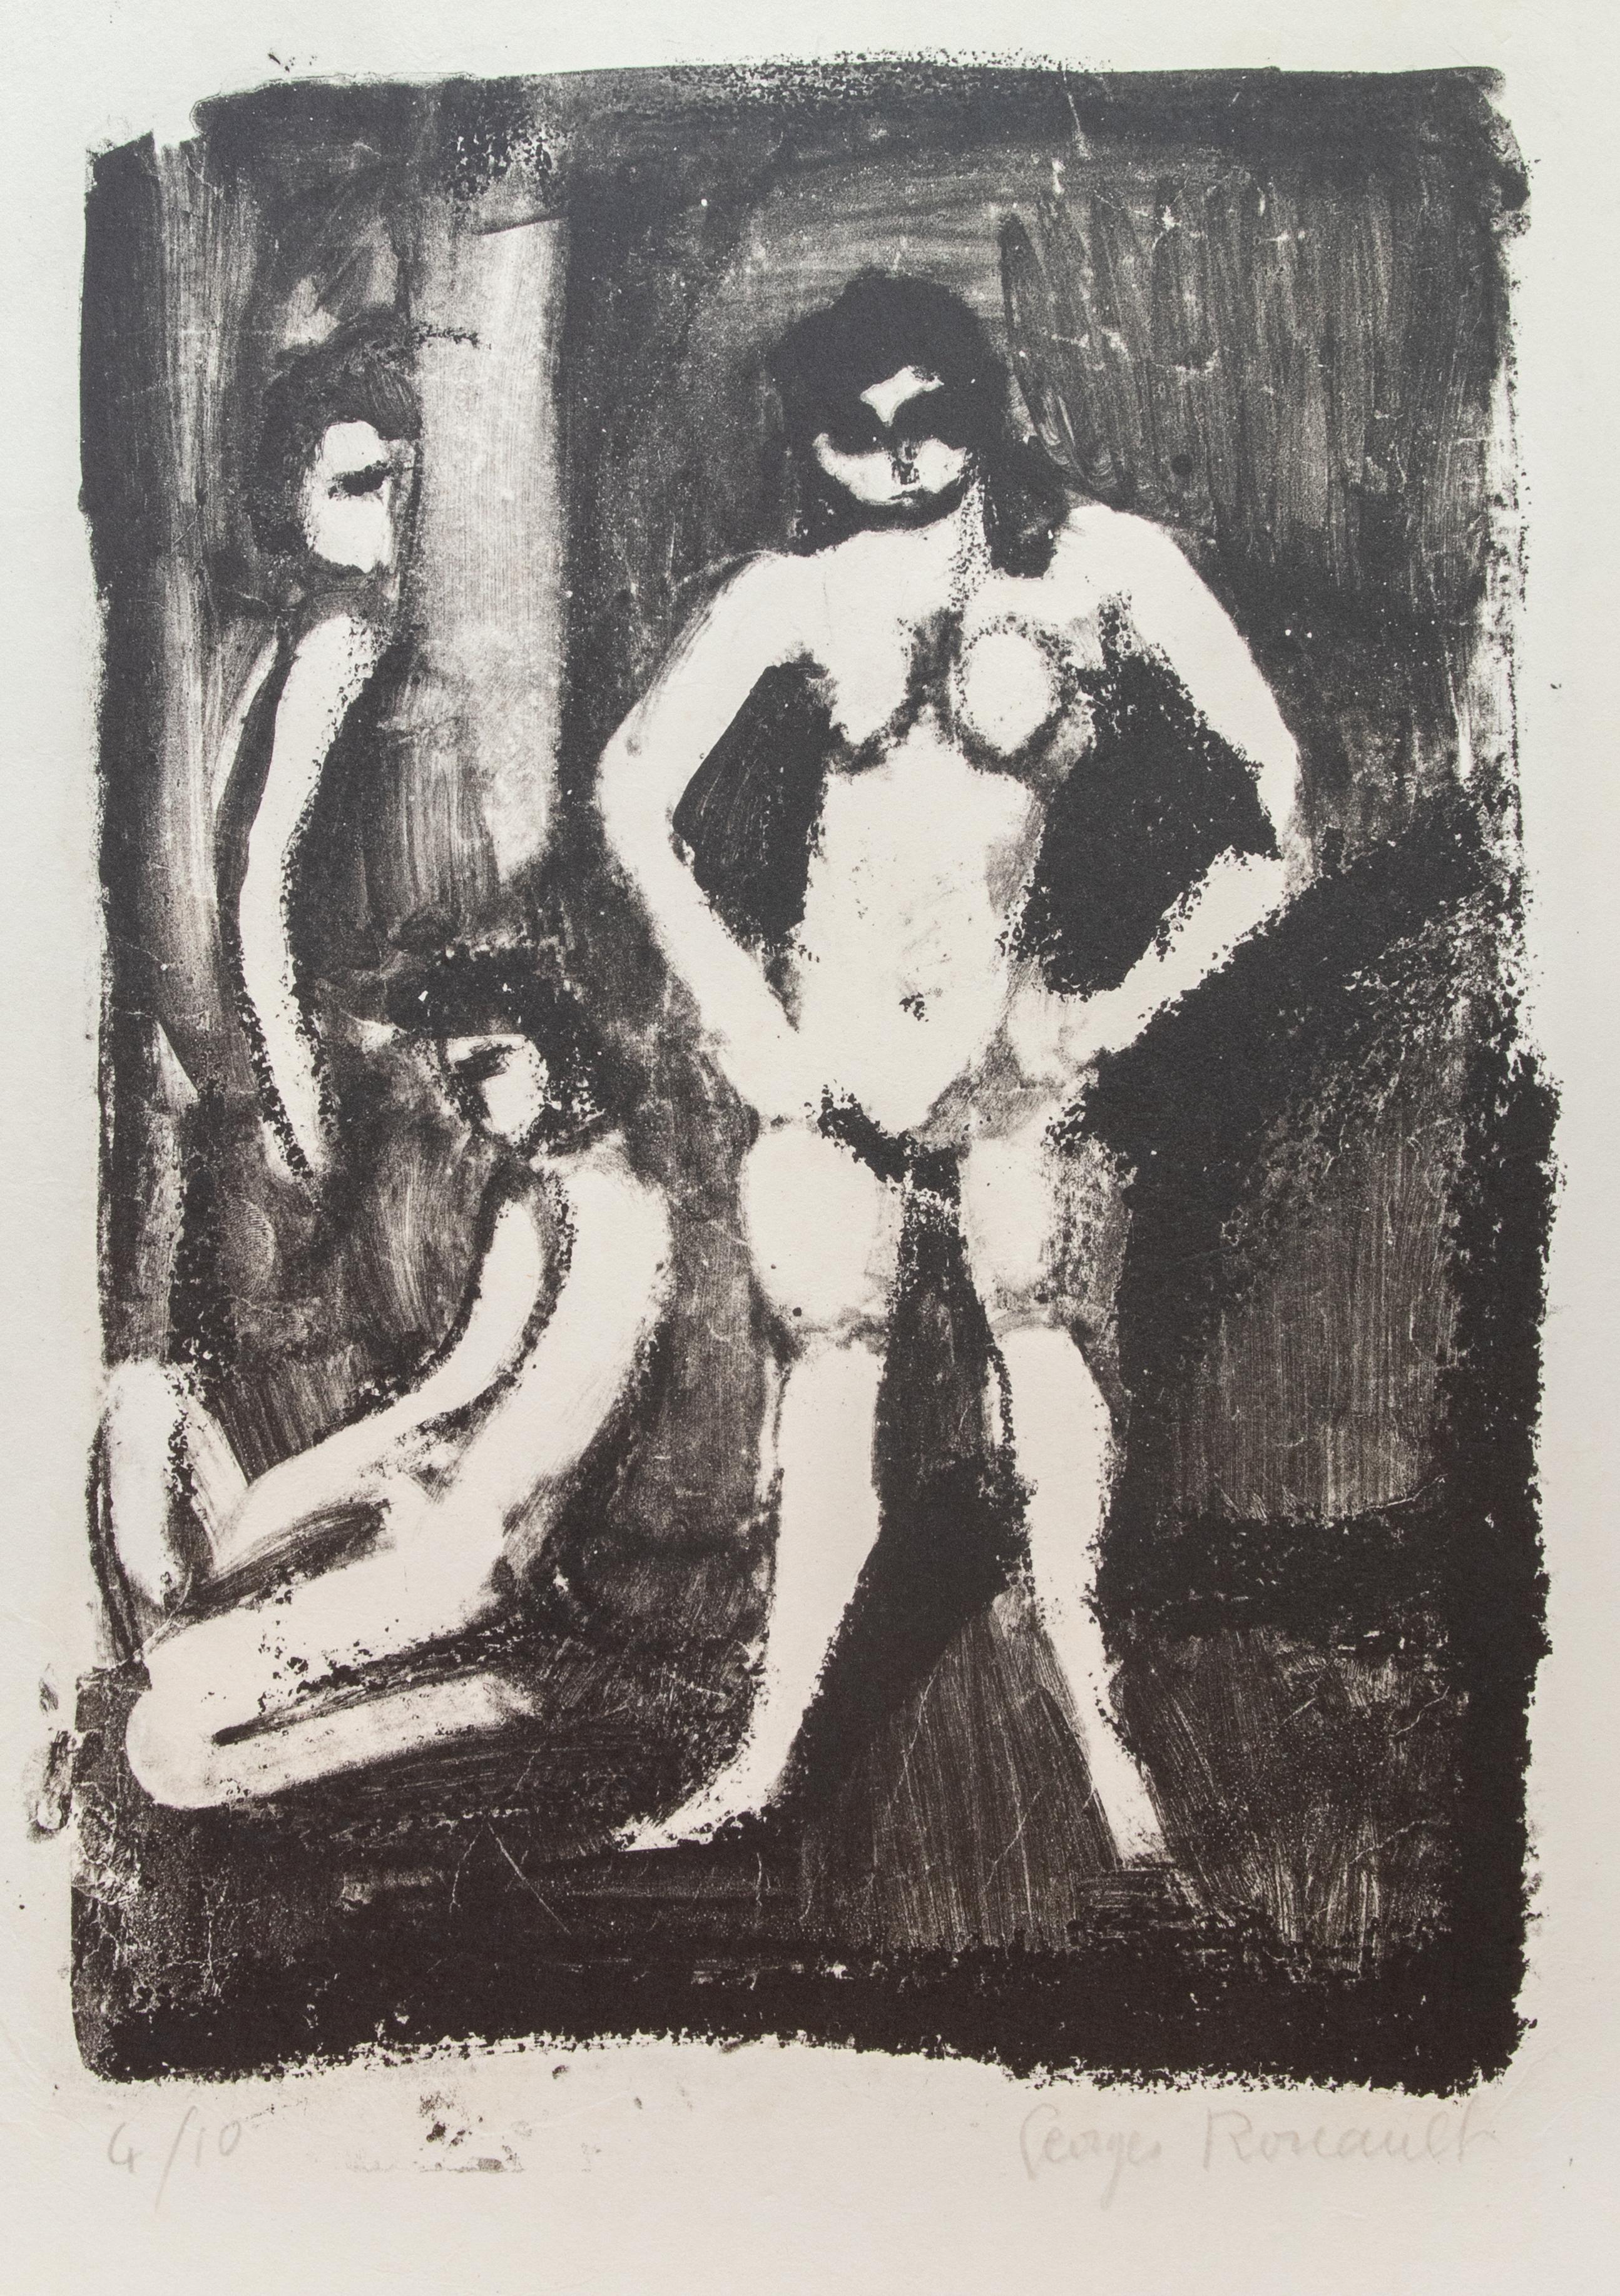 Hand signed and numbered. Third state, edition of 10 plus some artist proofs, signed. 
Hand signed and numbered in pencil.
Very good condition.

Reference Catalogue Raisonné: "Georges Rouault: Oeuvre Gravé" by Isabella Chapon, n.334 pp. 301.